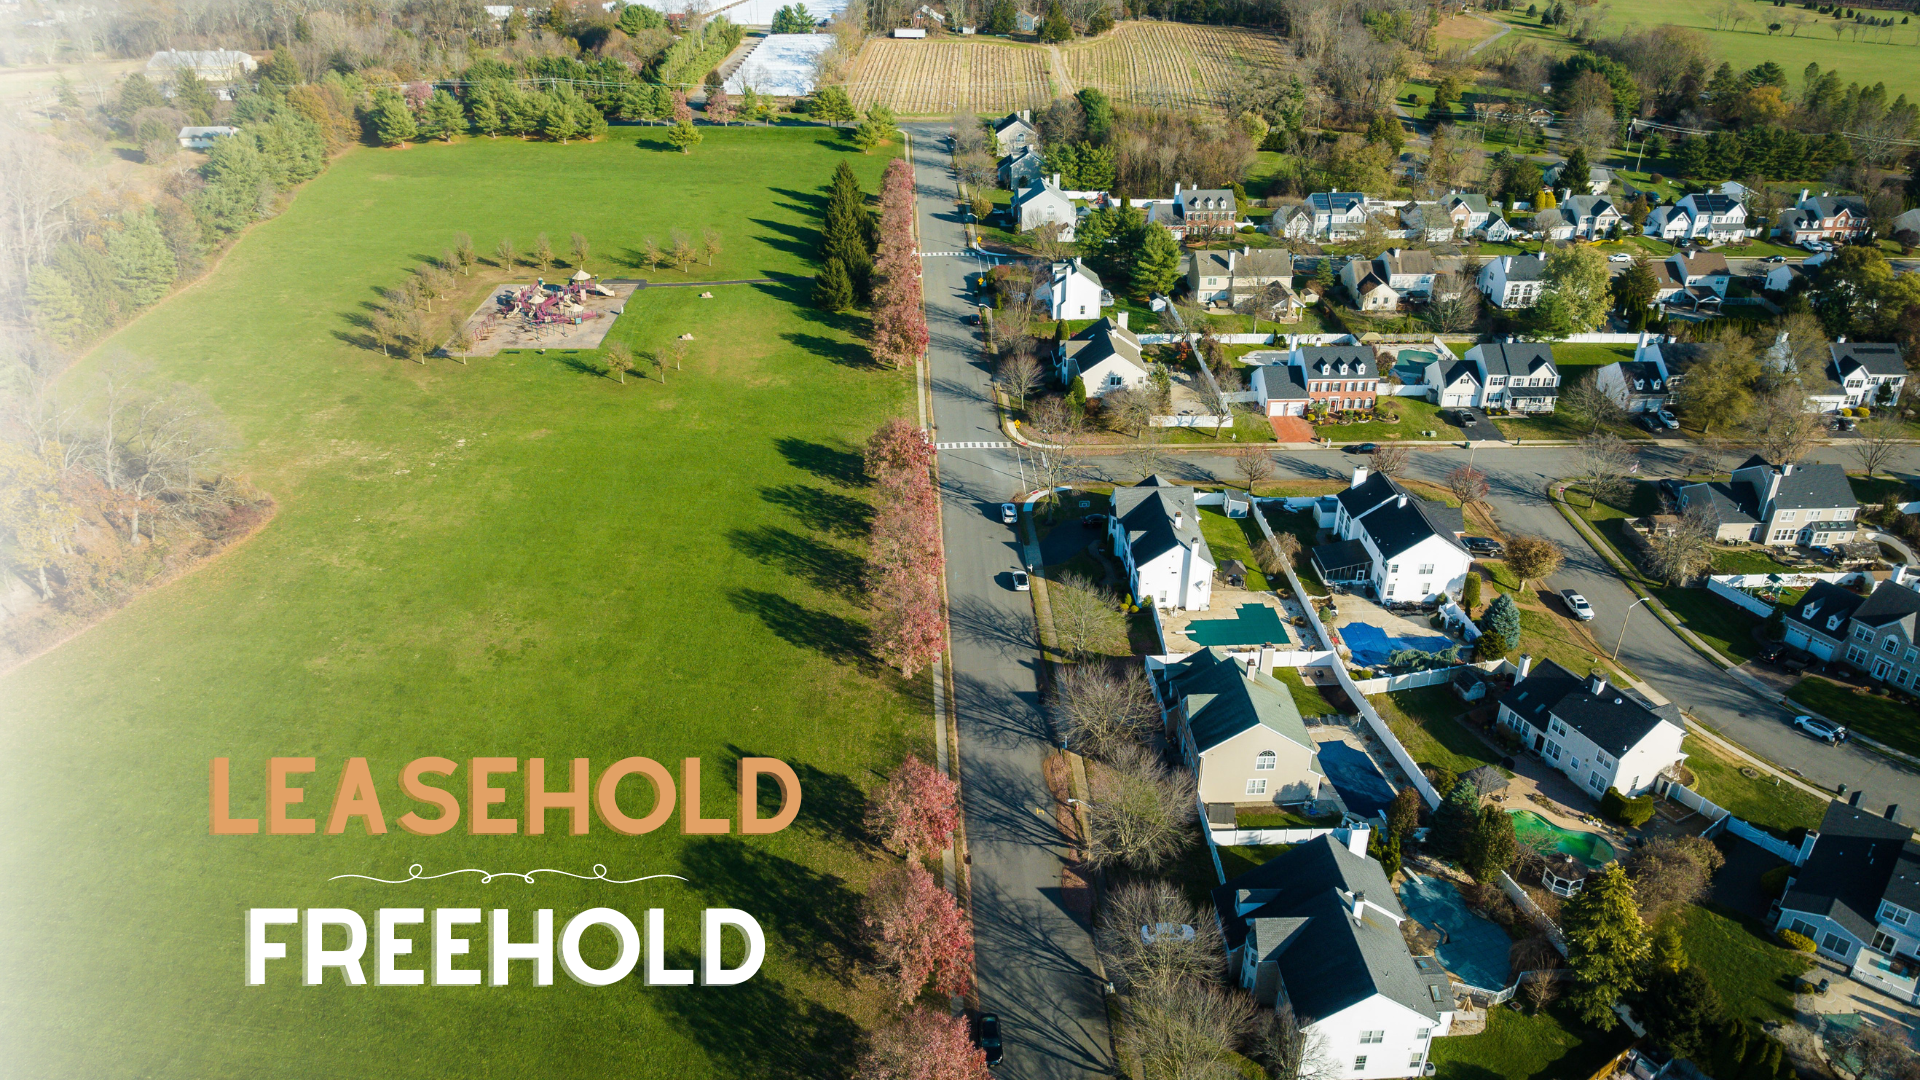 Leasehold vs. Freehold: What's the Difference?